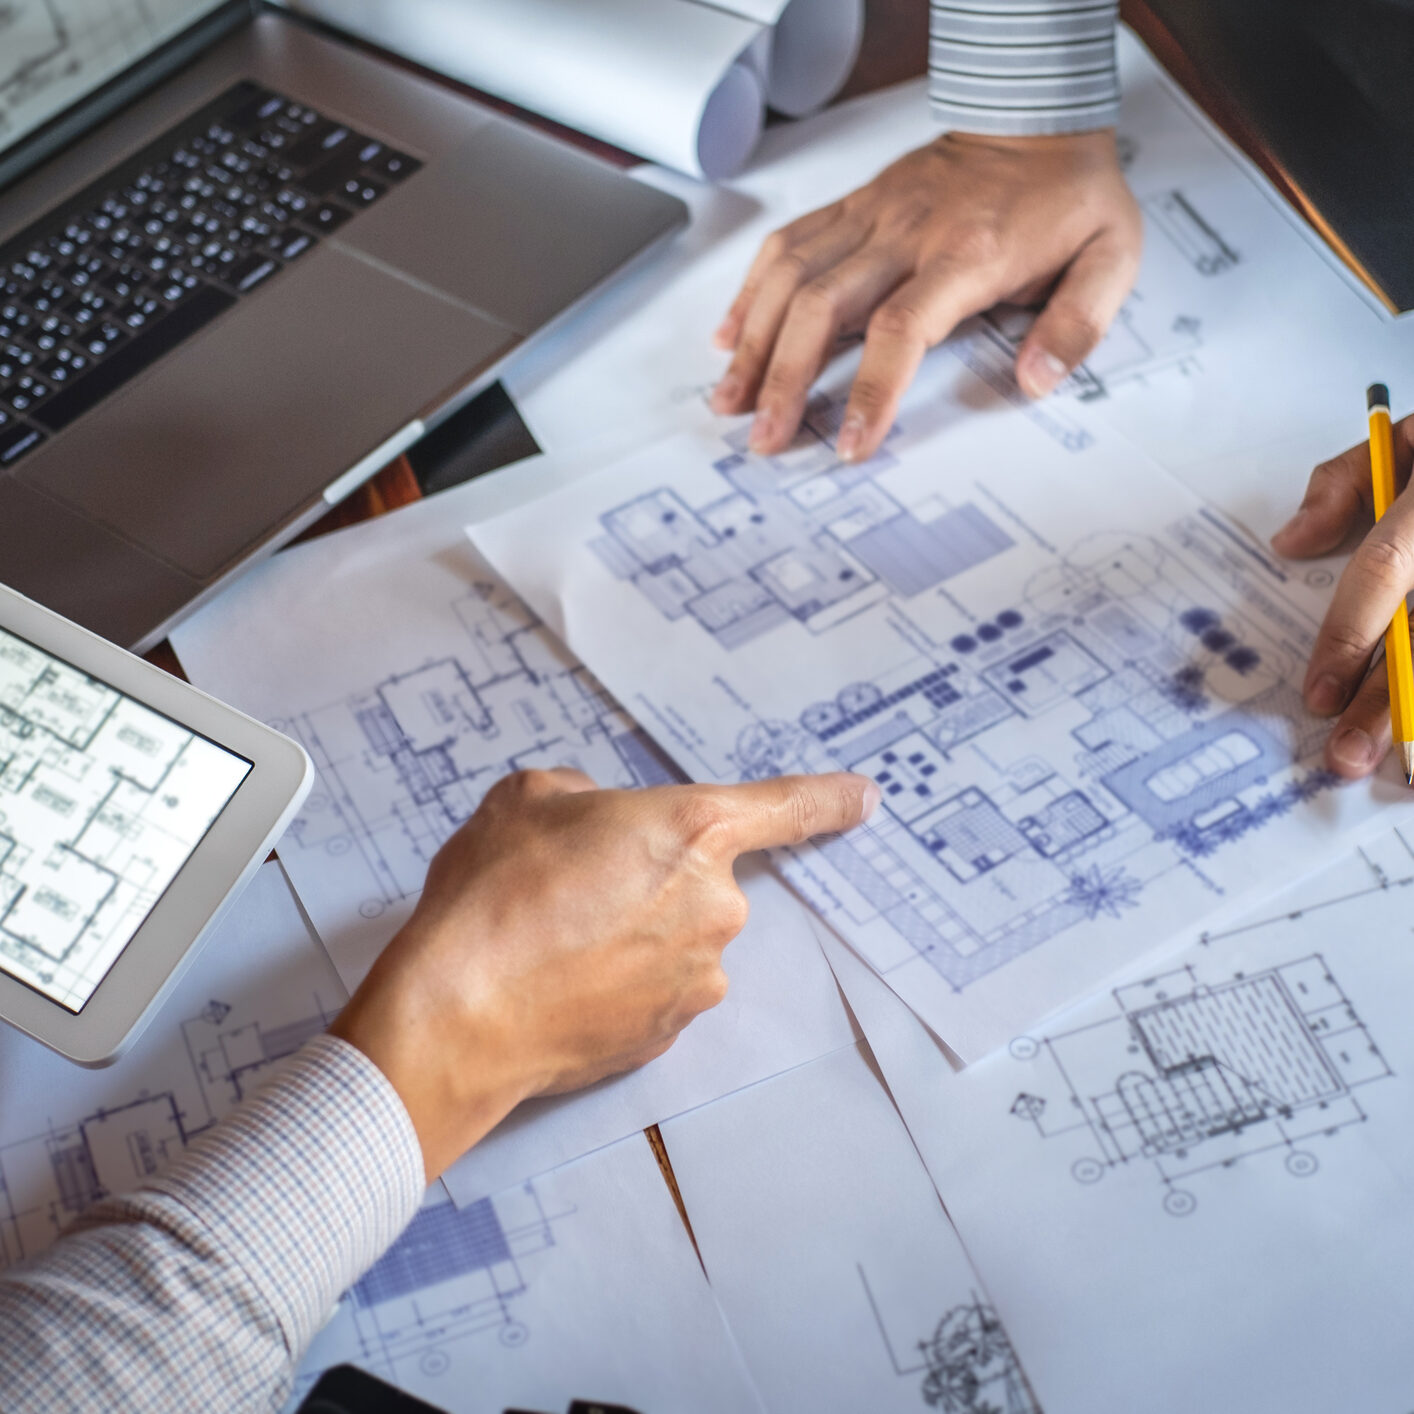 Professional Building Systems Design Engineers based in Michigan and Florida